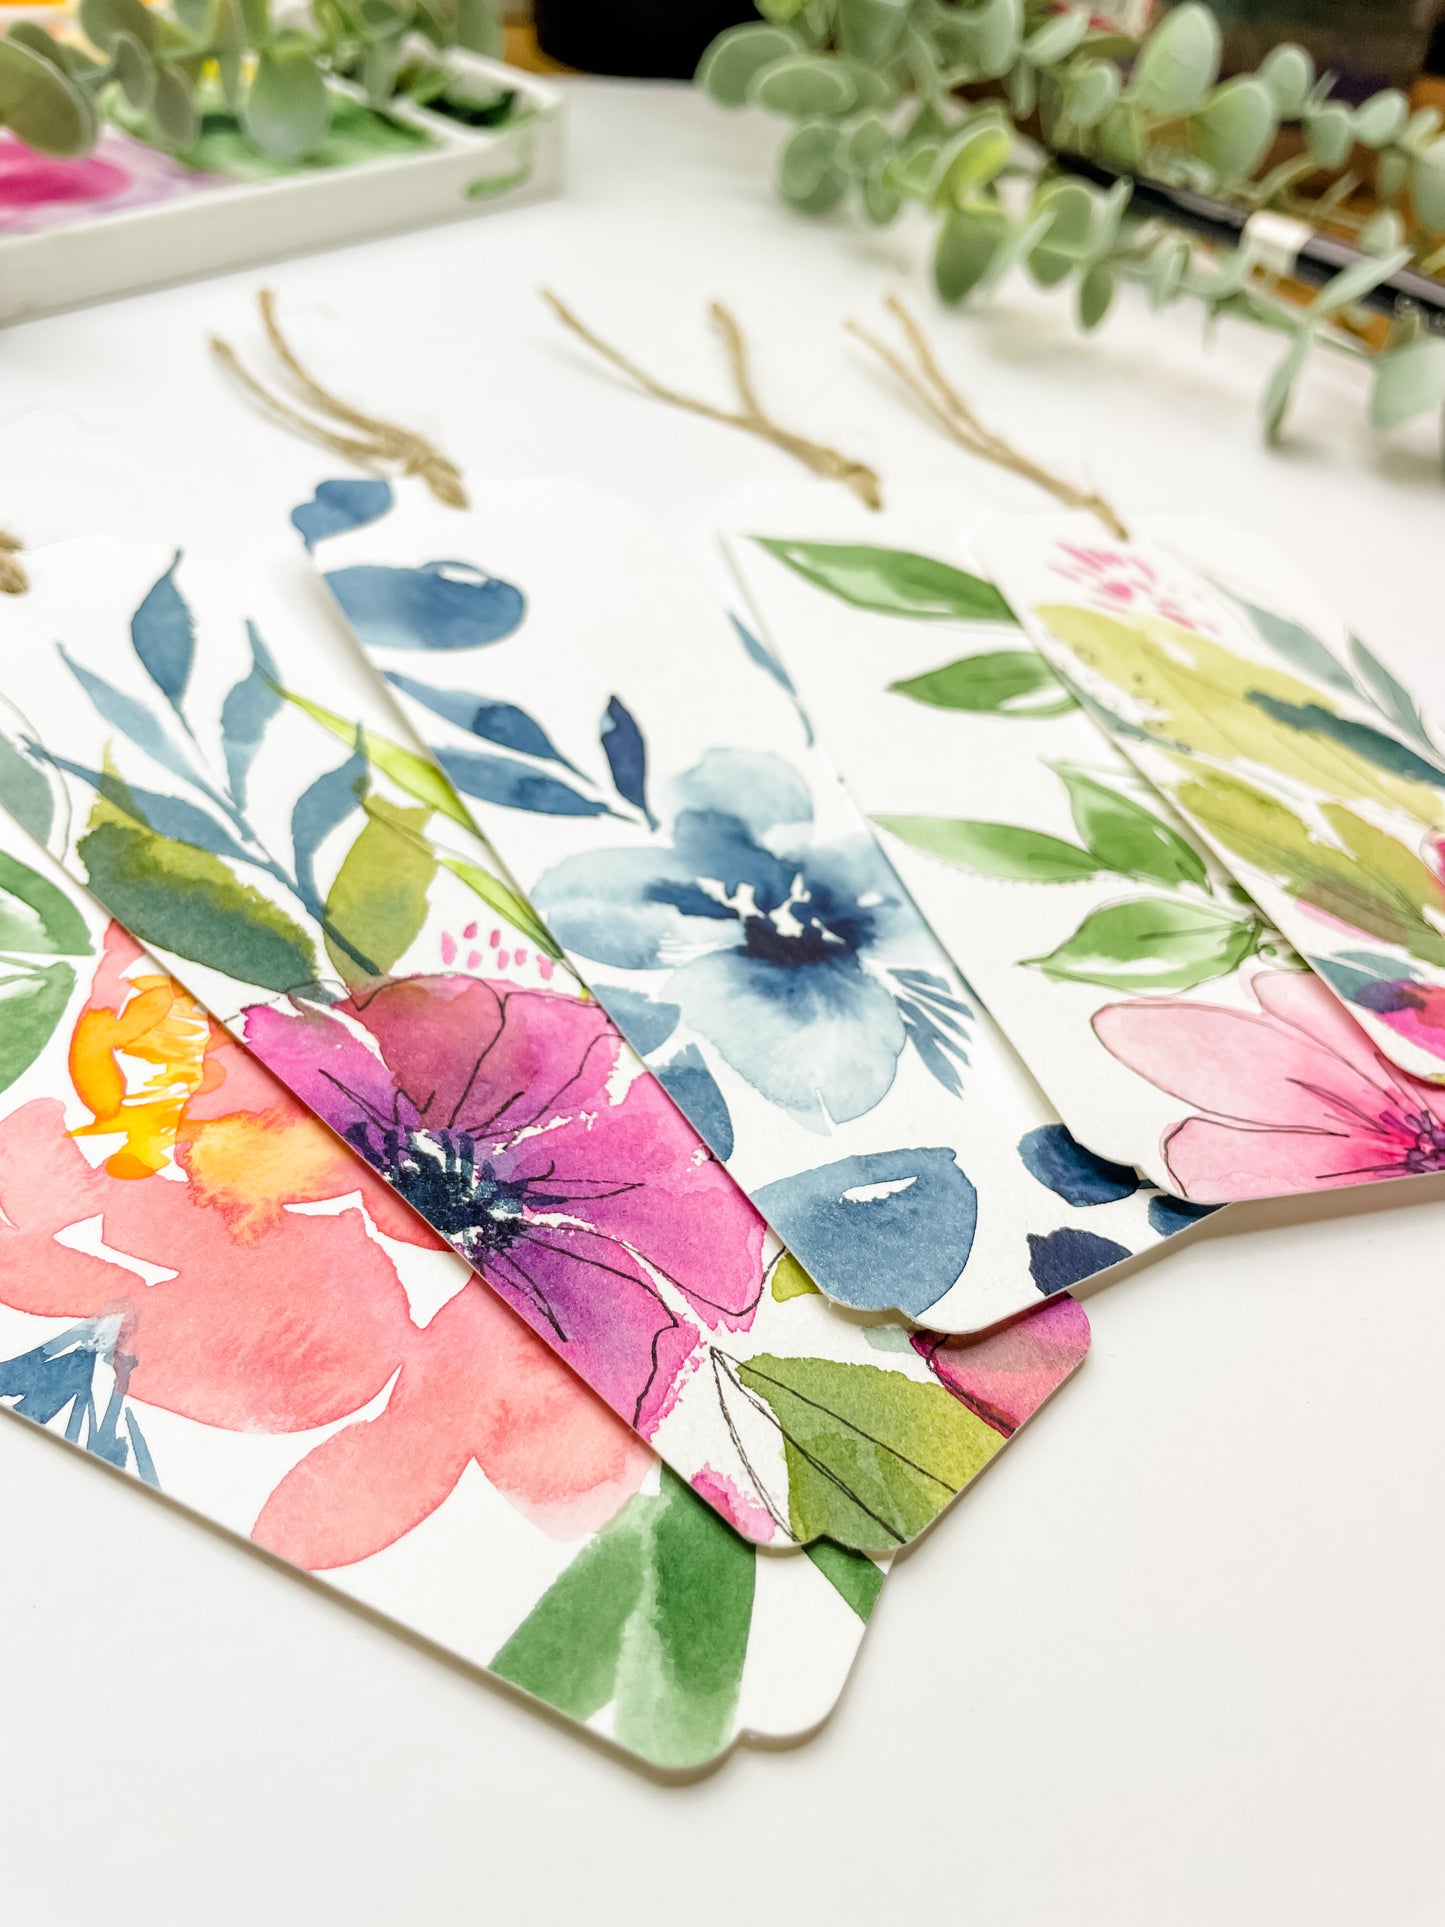 Watercolor Floral Bookmarks at Biscott’s in Daybreak